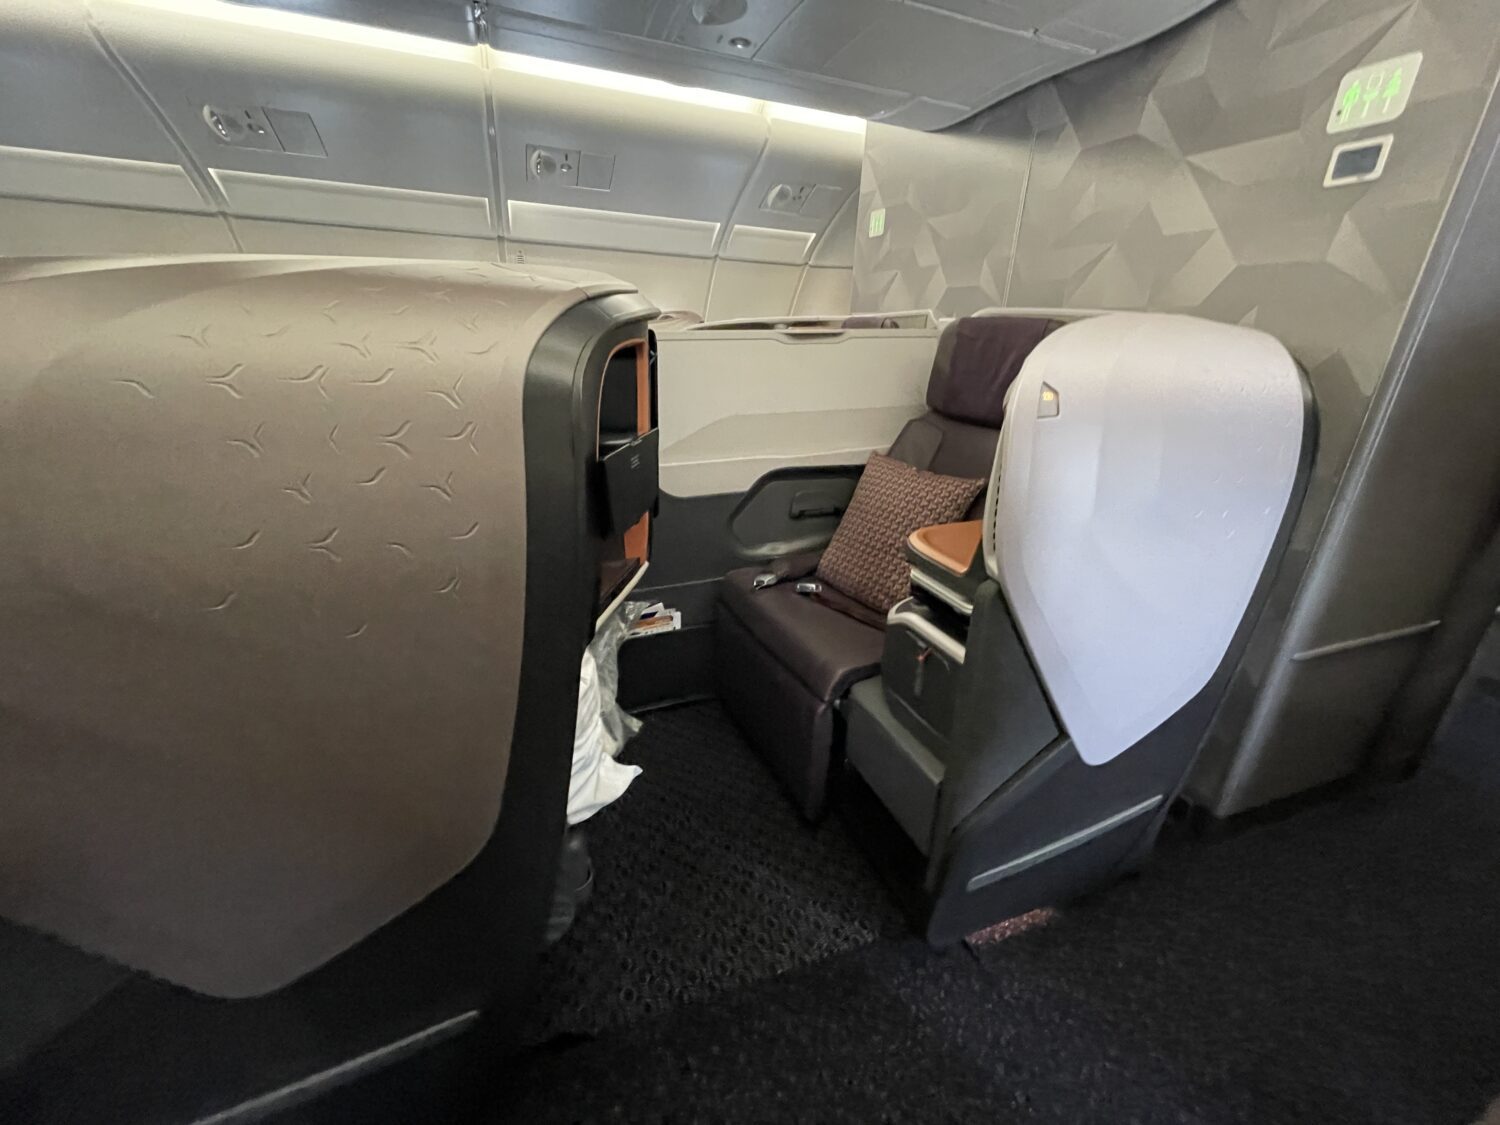 Singapore Airlines Business Class Seat